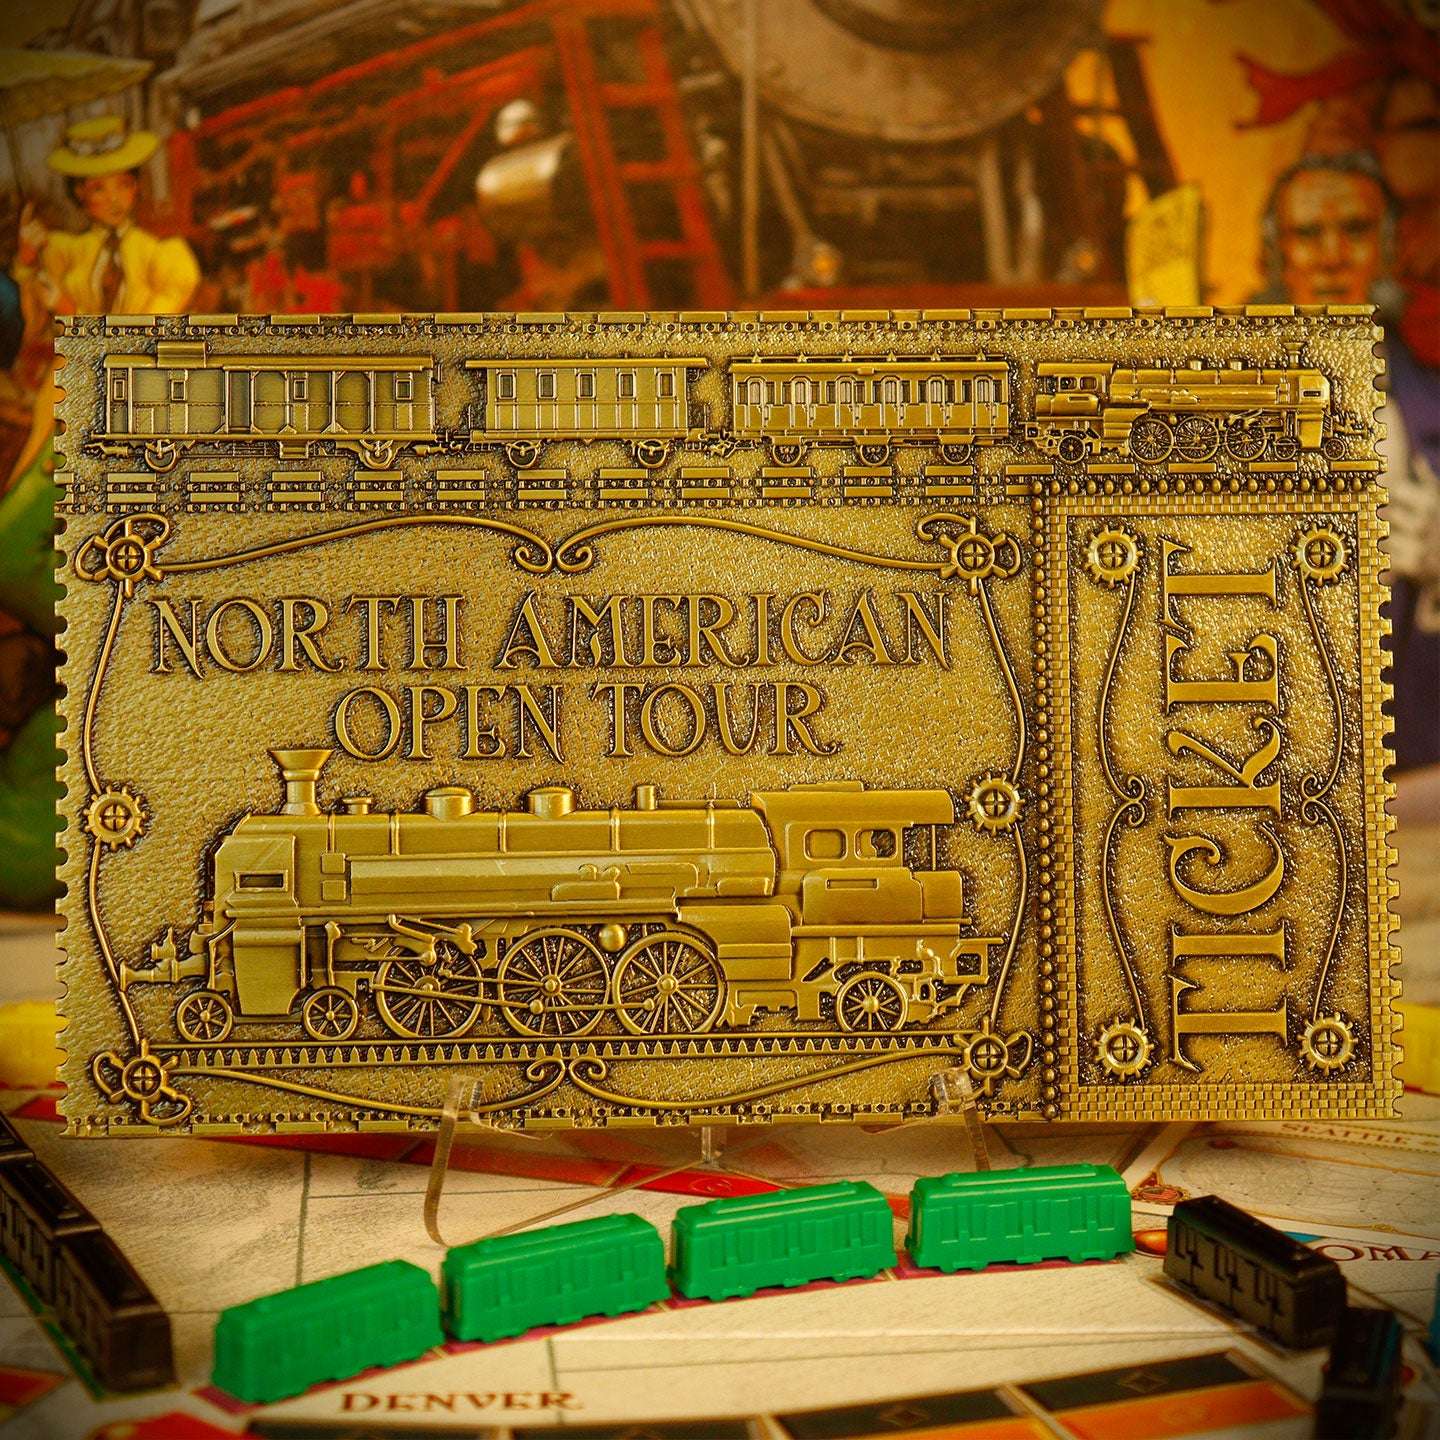 Ticket to Ride North American Open Tour Ticket